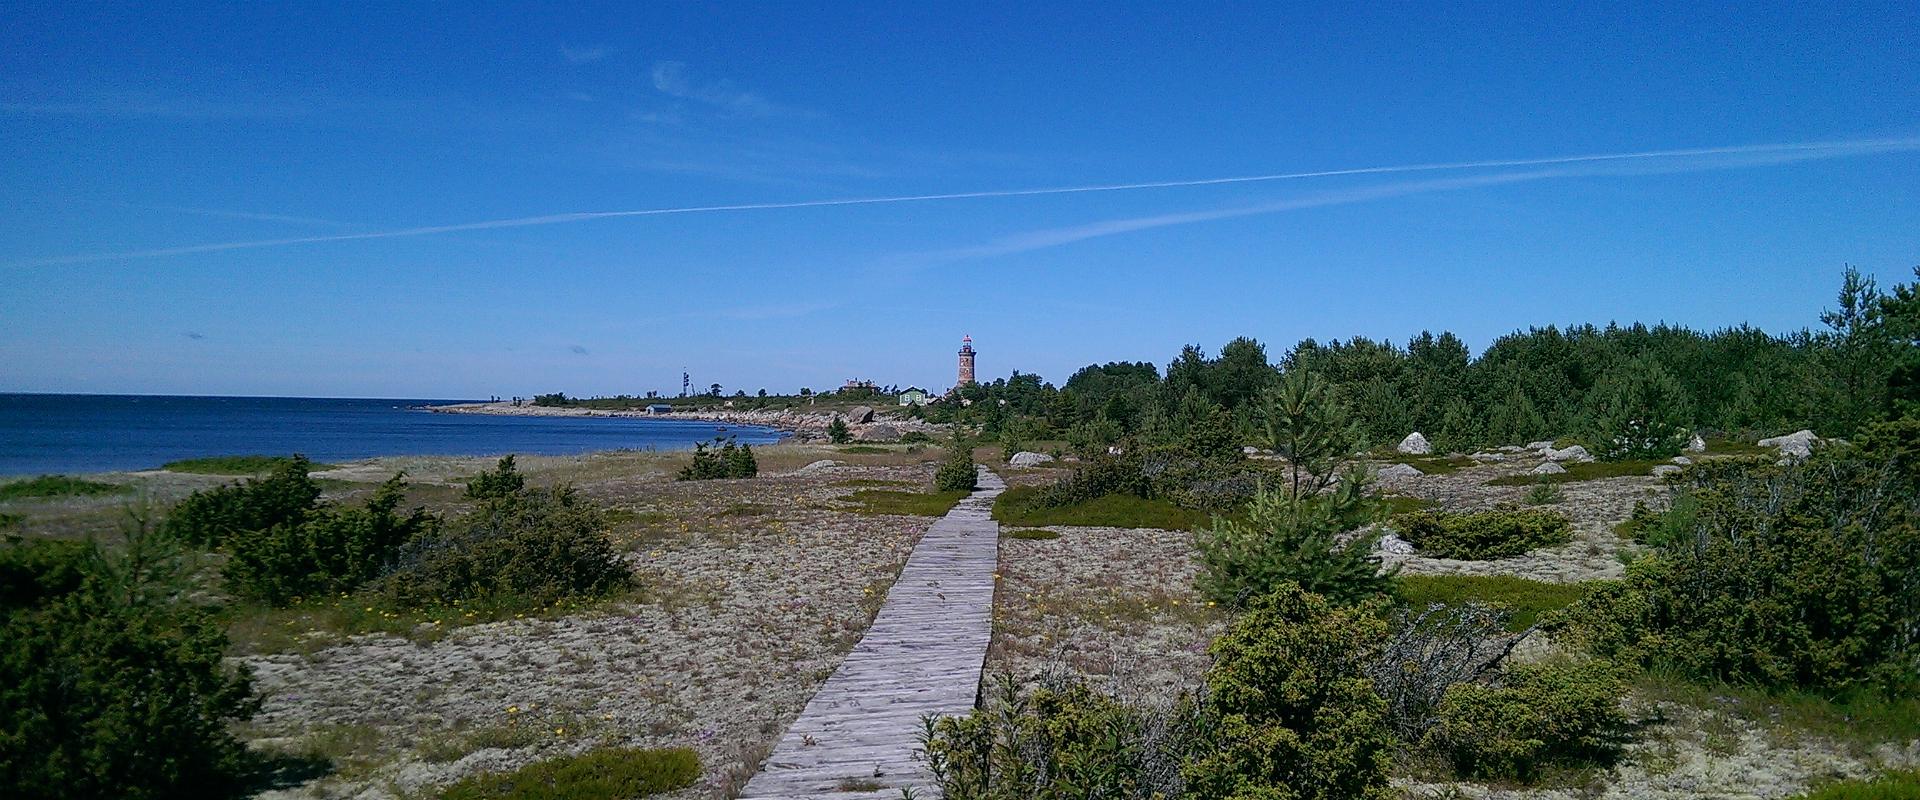 Mohni Island, in addition to its beautiful nature, attracts visitors with the Mohni lighthouse, which has guided sailors since the ancient times, as w